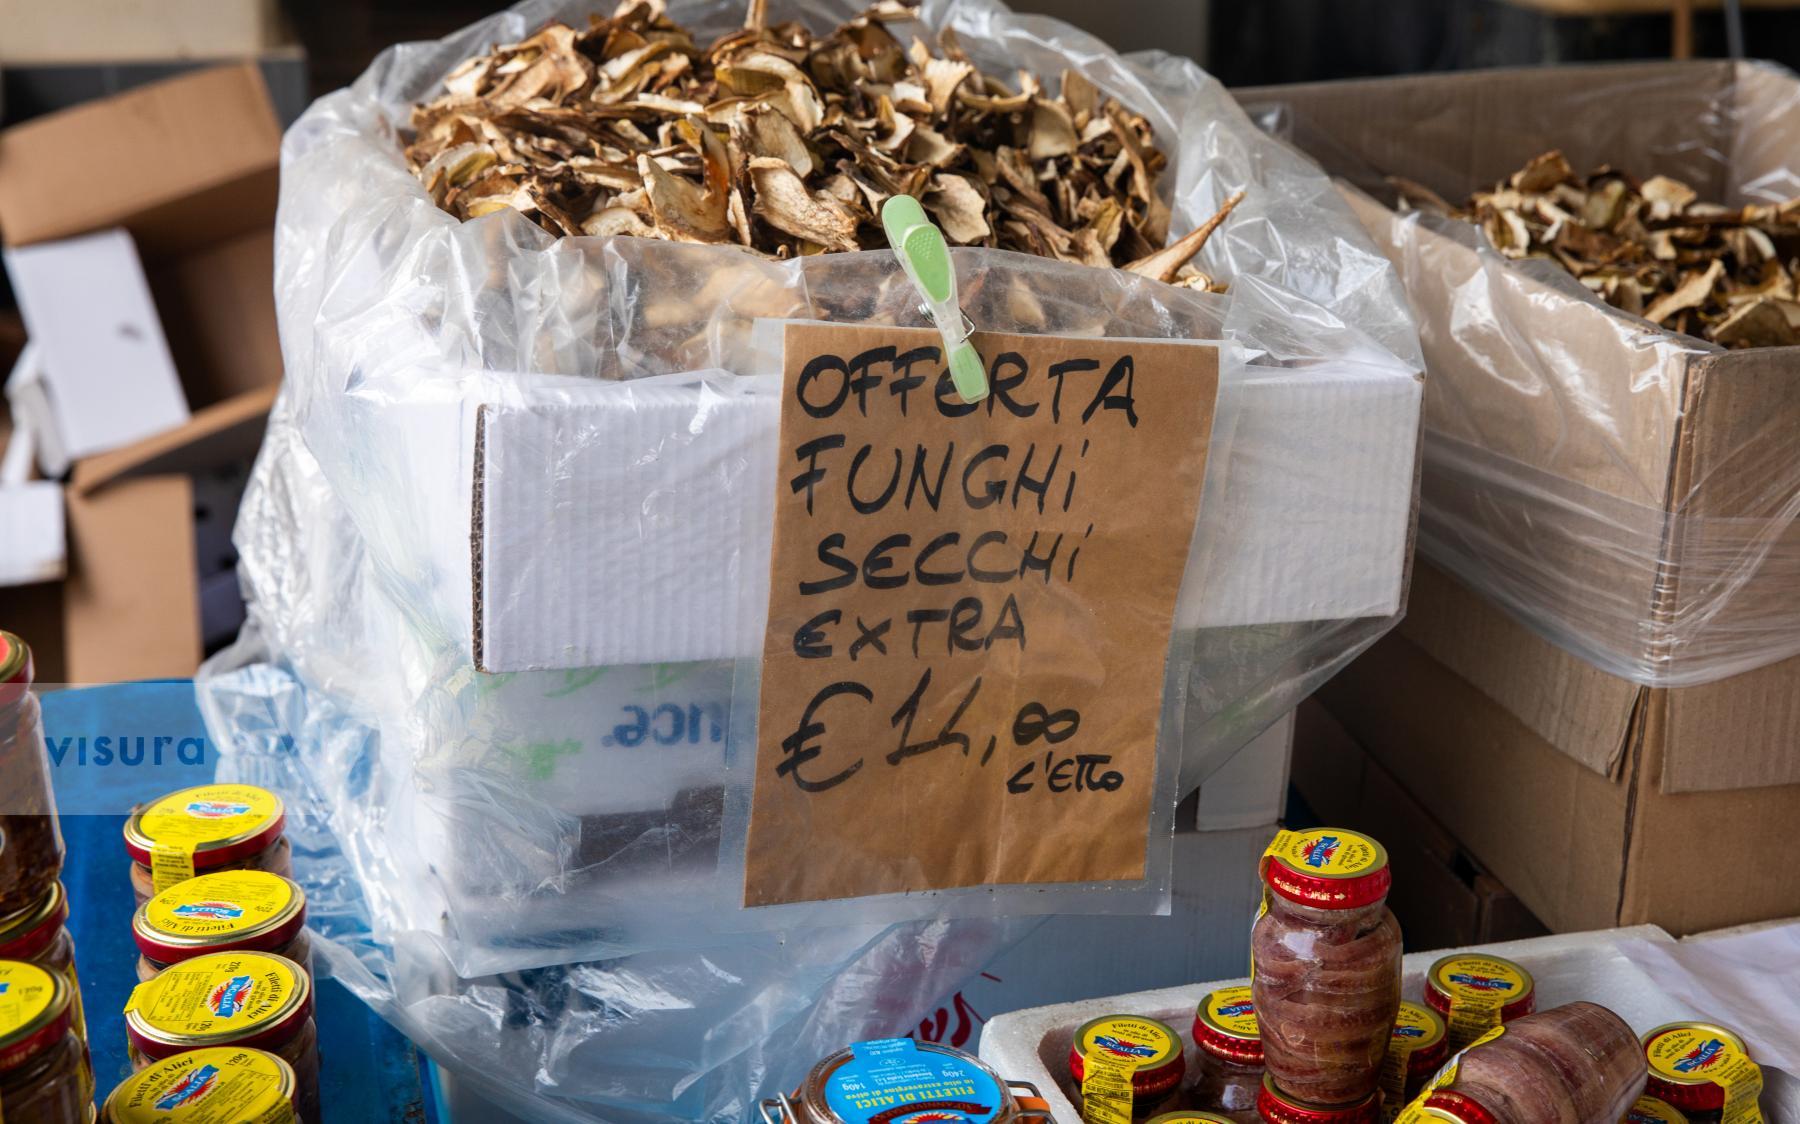 Purchase Mushrooms and Anchovies for Sale in Italy Food Market by Katie Linsky Shaw